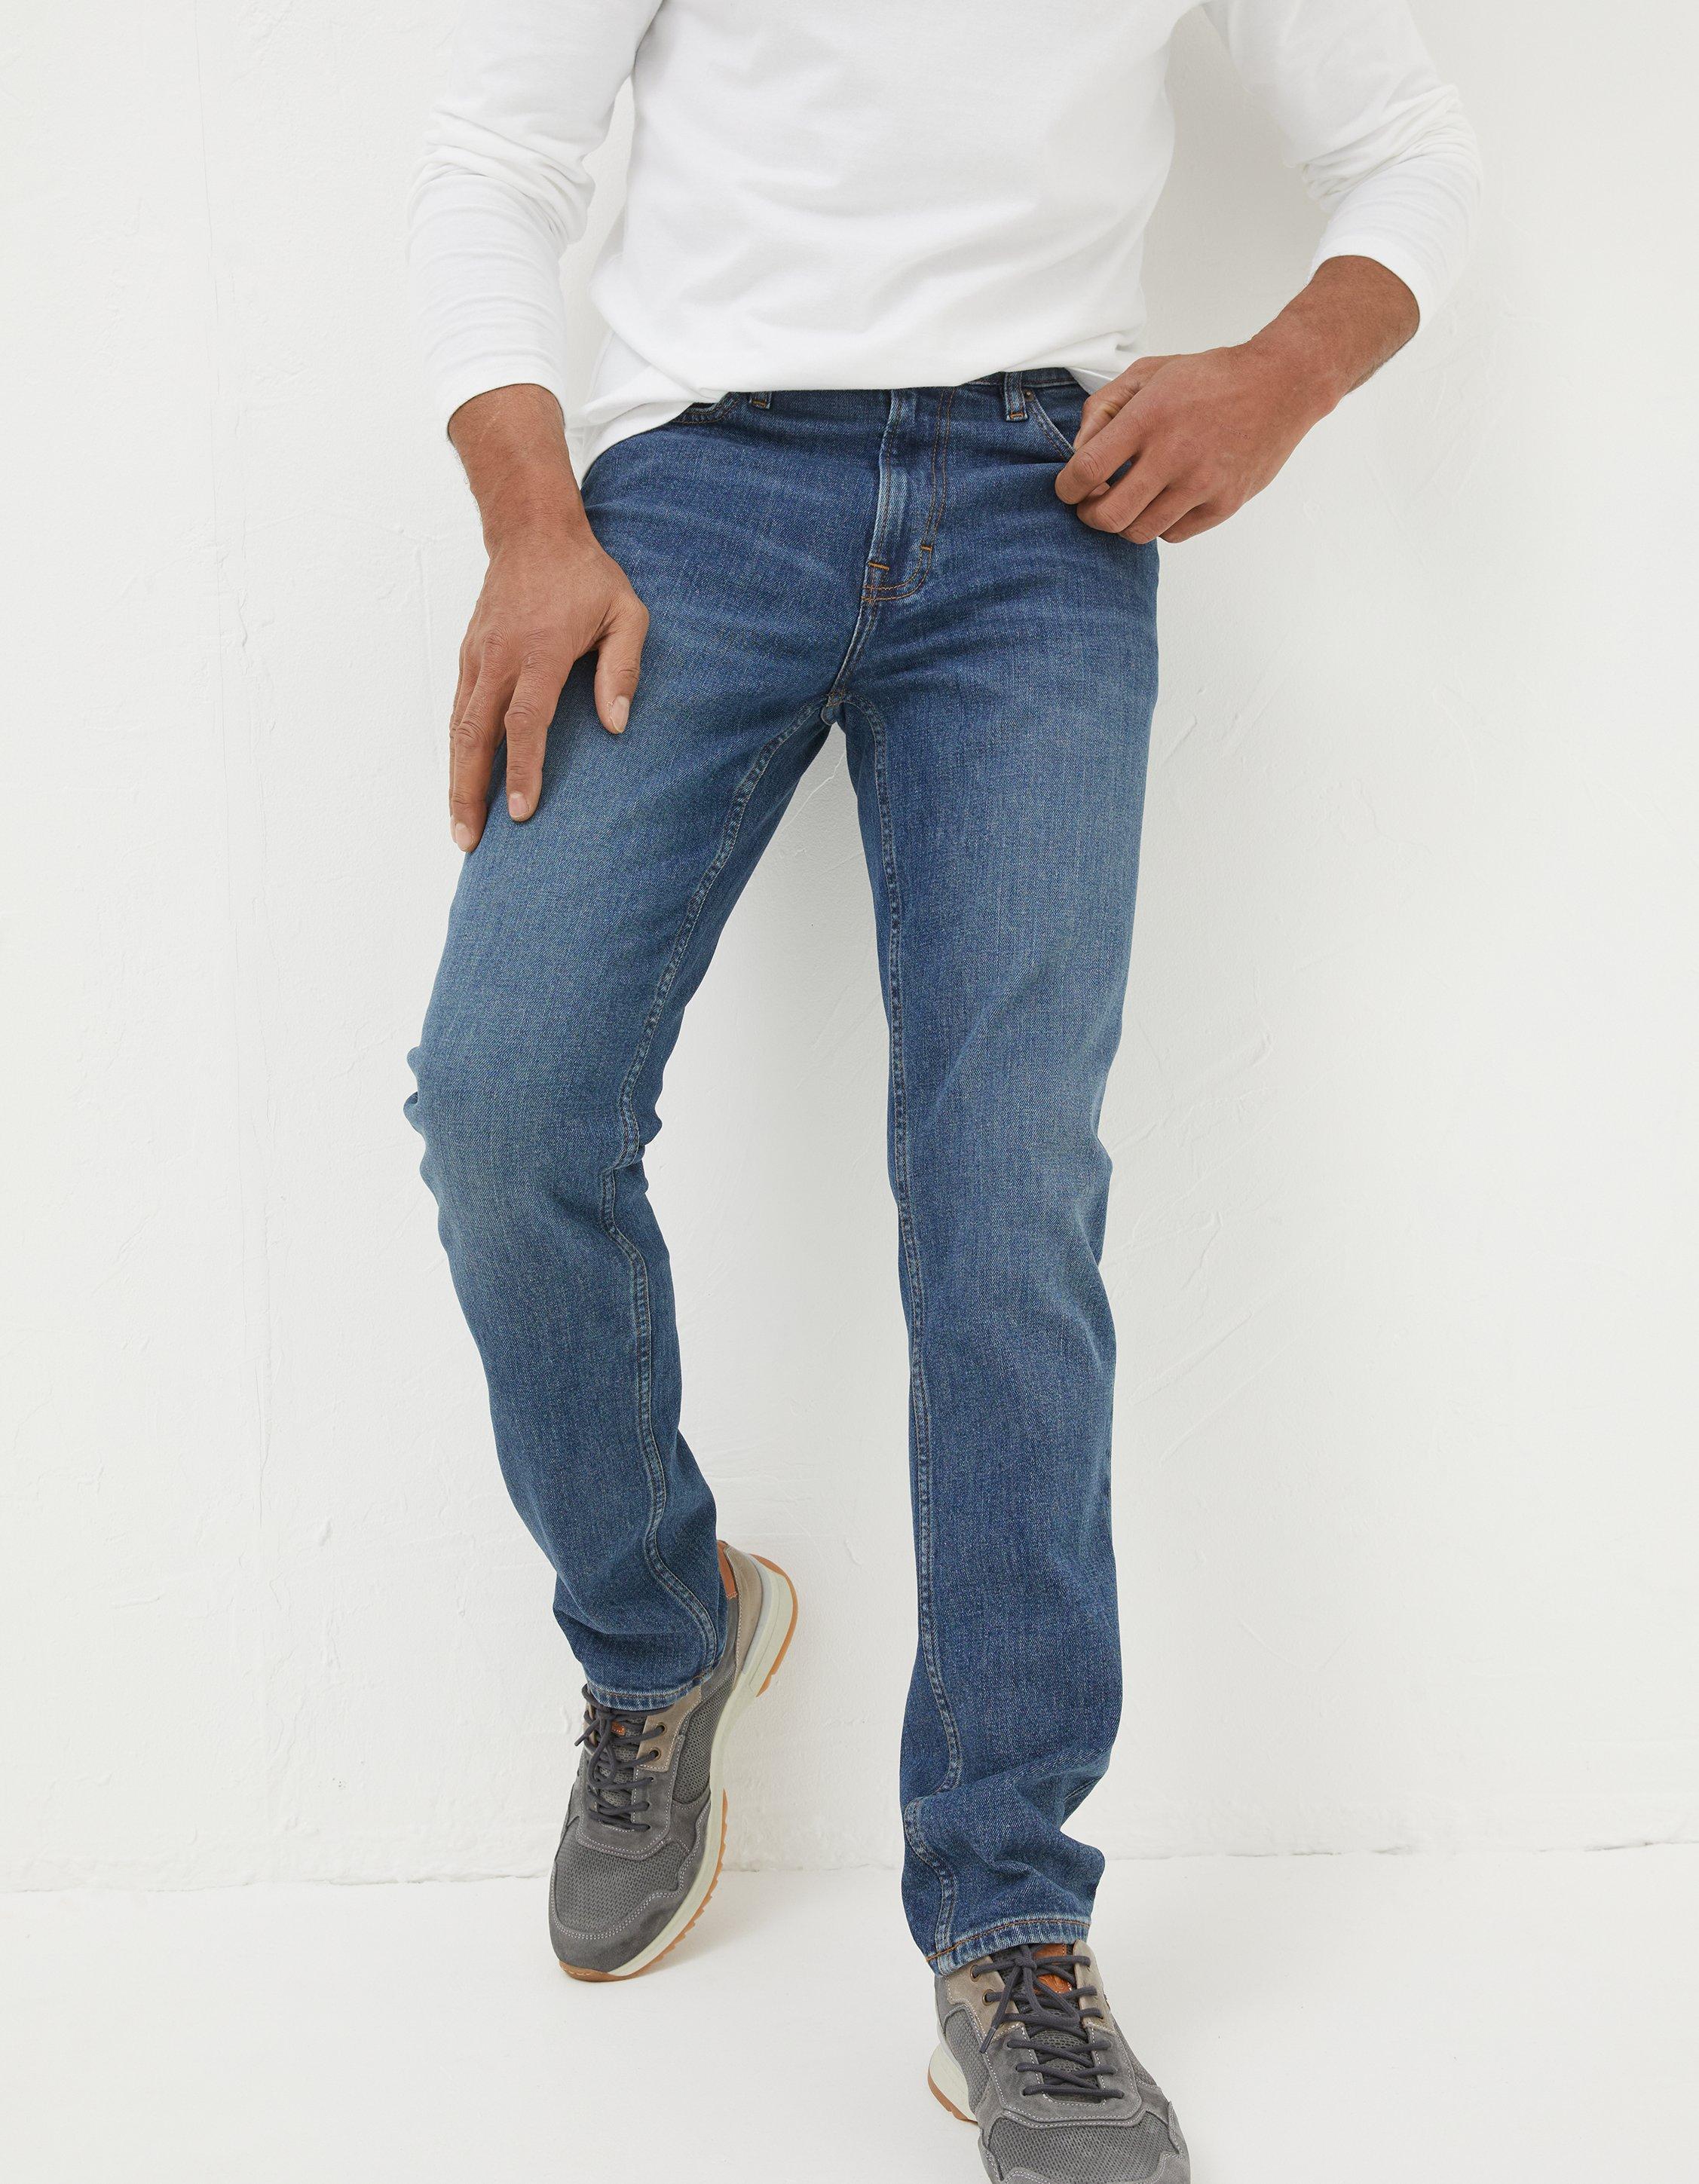 Jeans for Men, Slim, Bootcut & Straight Jeans